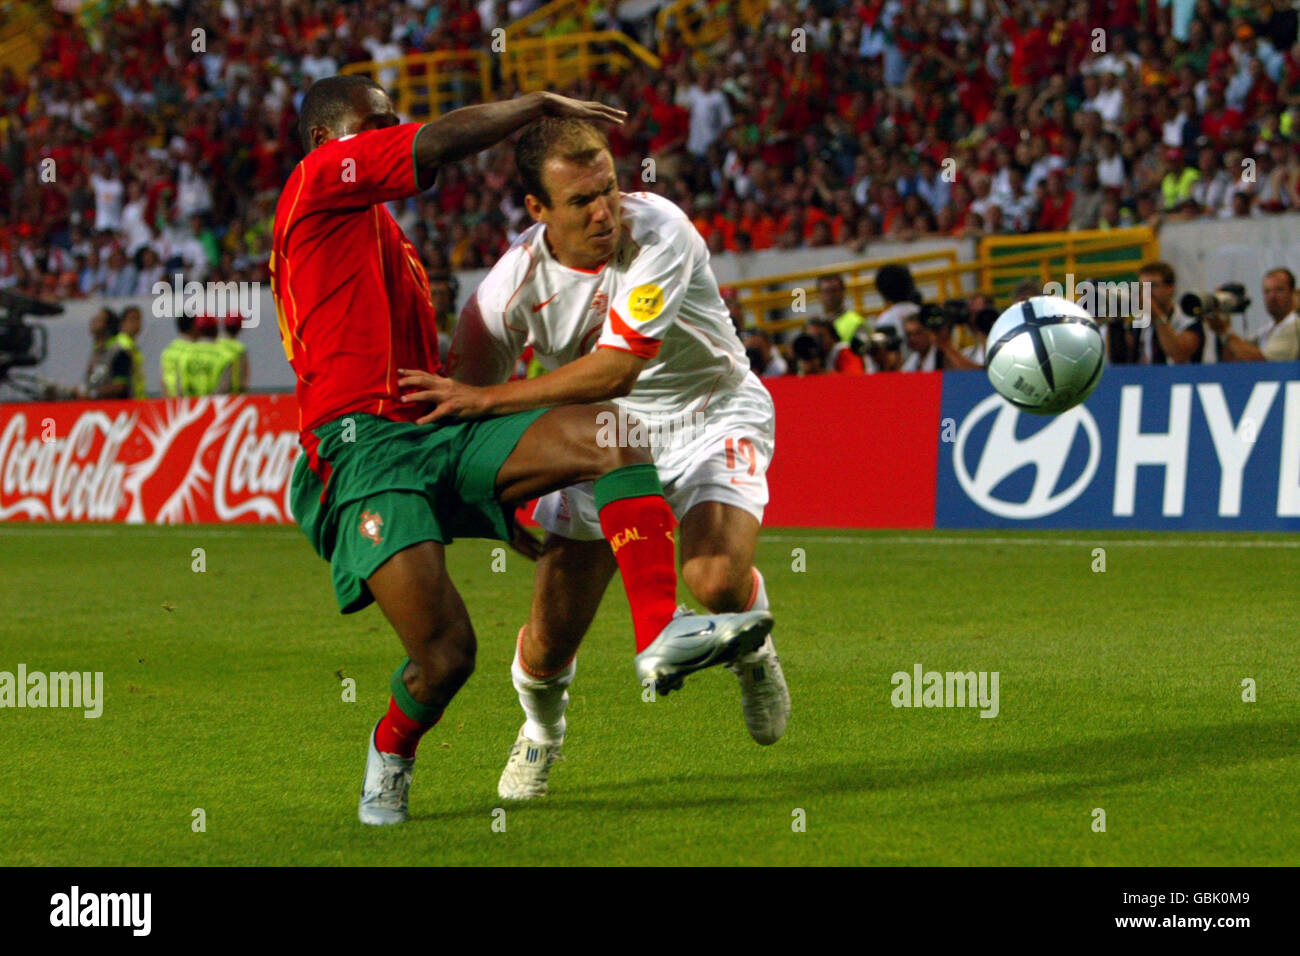 Soccer - UEFA European Championship 2004 - Semi Final - Portugal v Holland. Portugal's Jorge Andrade and Holland's Arjen Robben battle for the ball Stock Photo